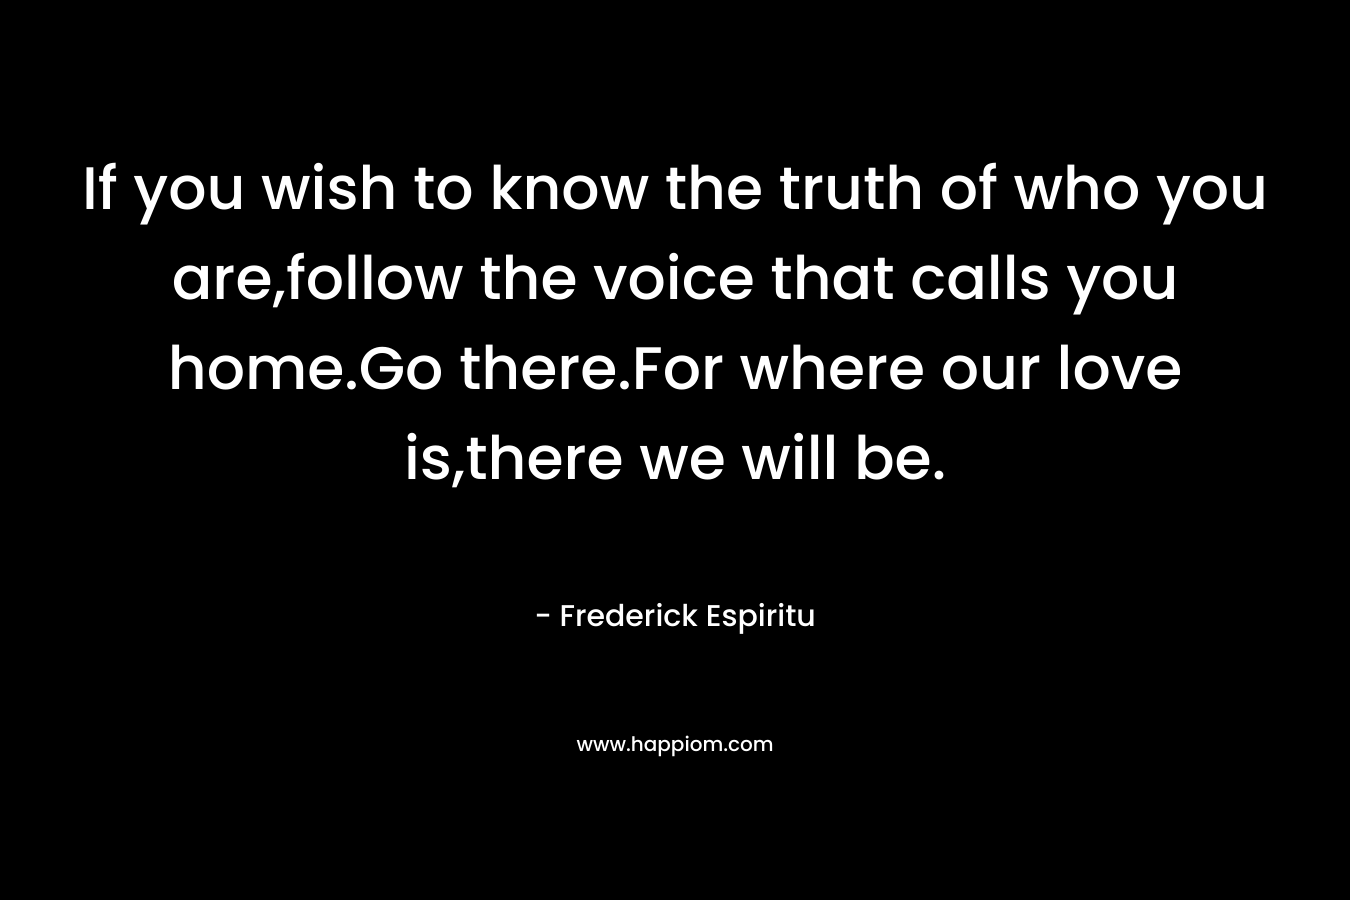 If you wish to know the truth of who you are,follow the voice that calls you home.Go there.For where our love is,there we will be. – Frederick Espiritu